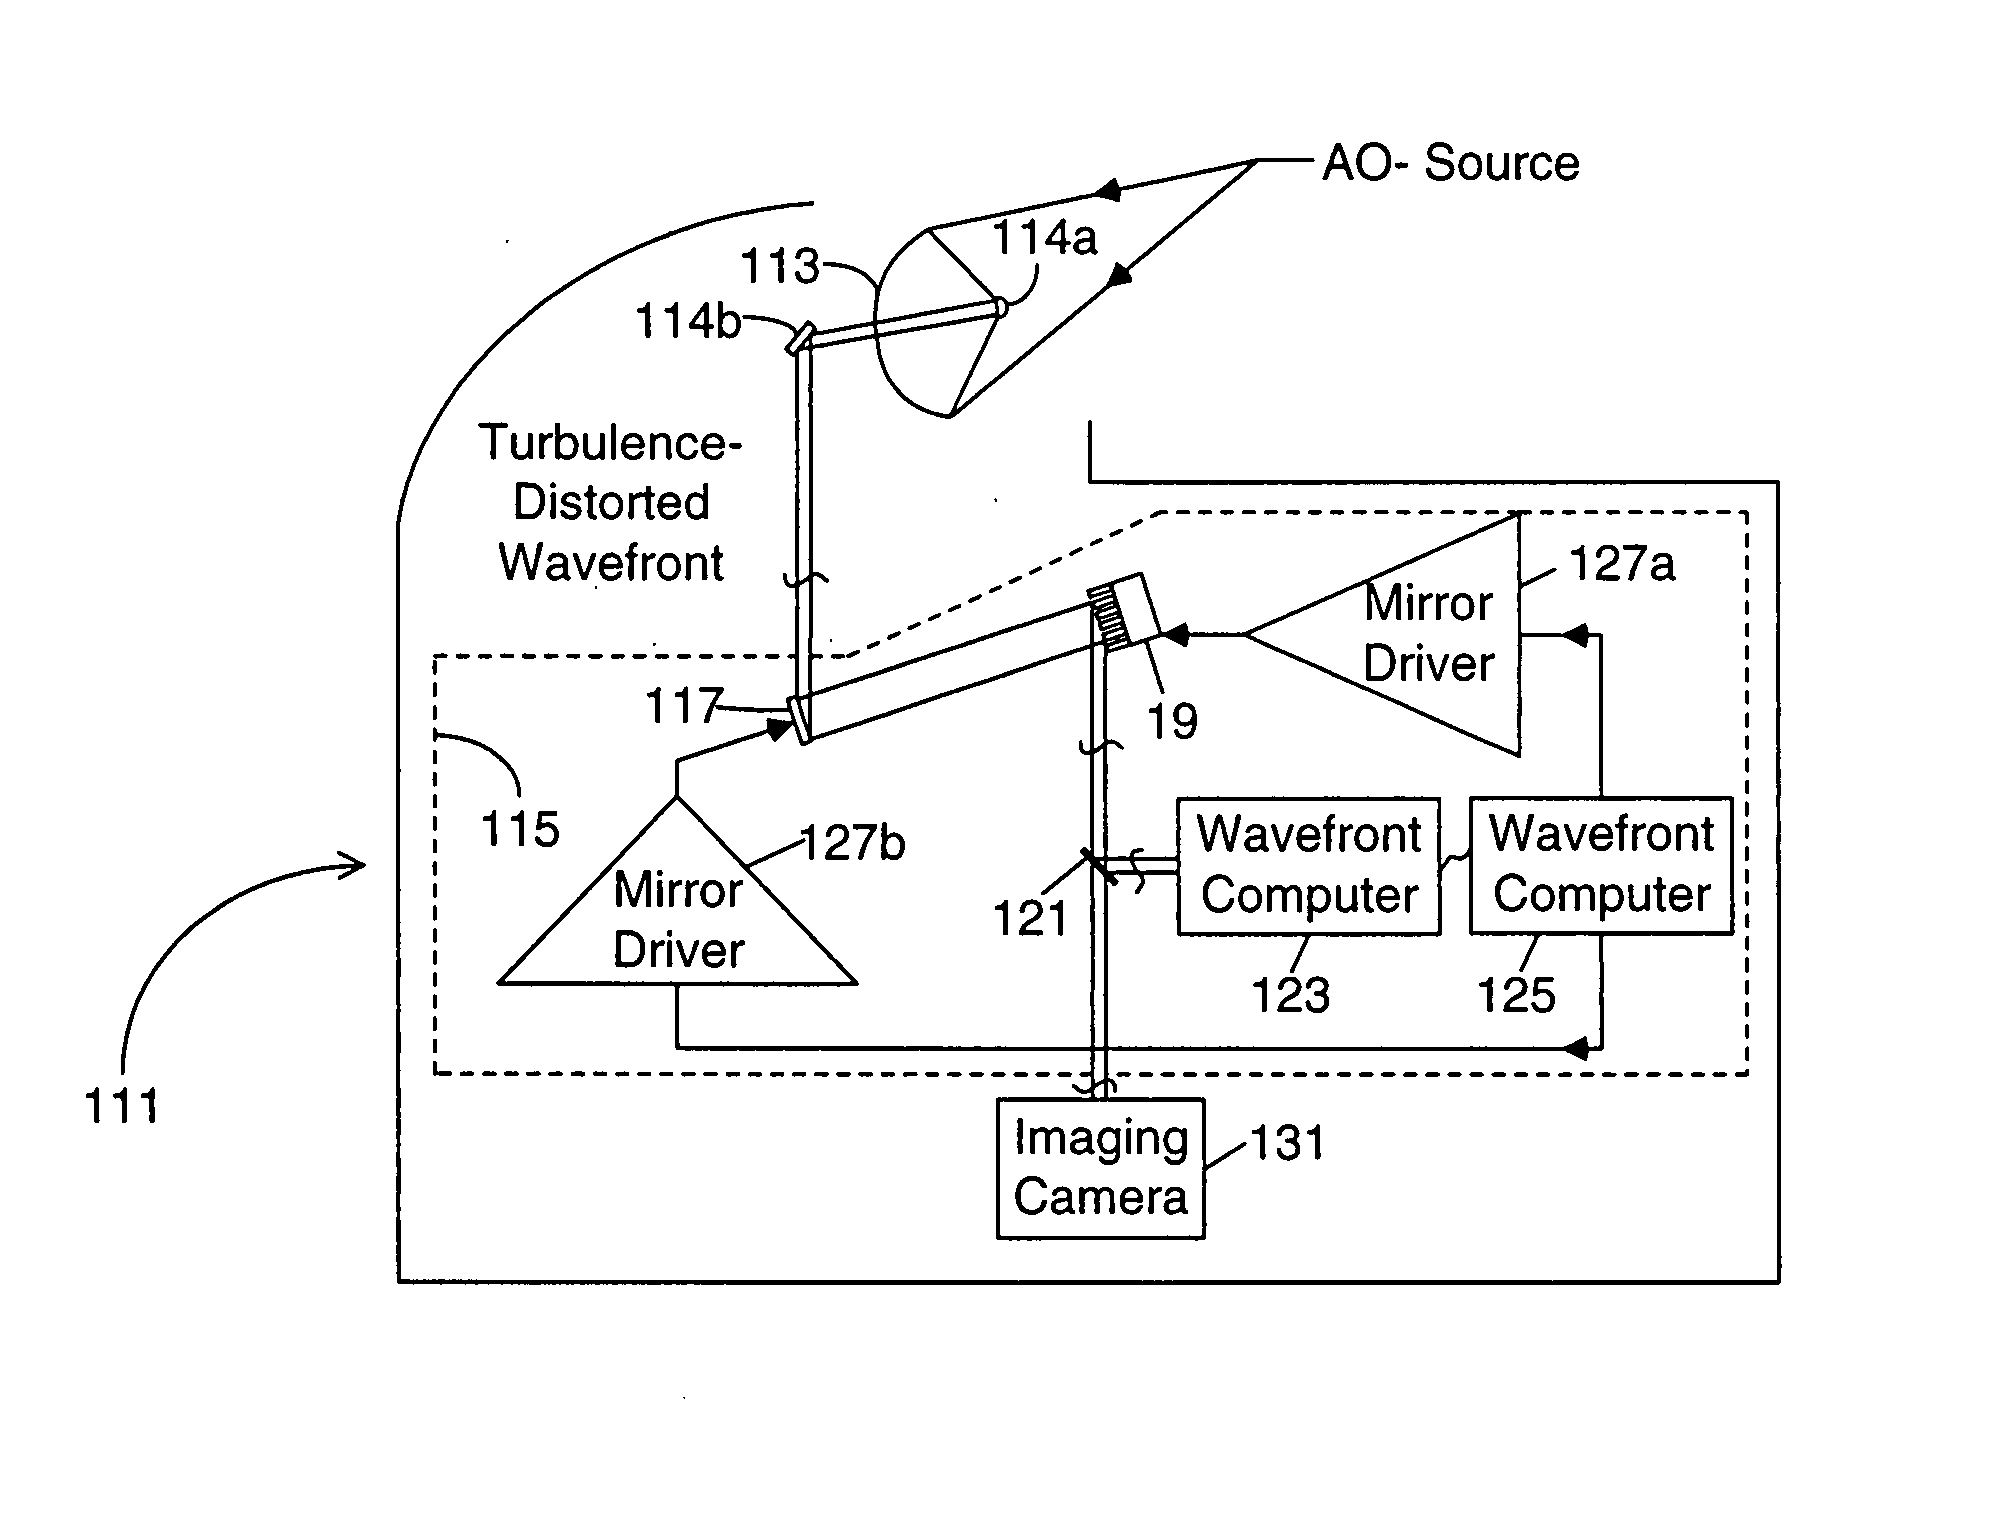 Method and apparatus for wavefront measurement that resolves the 2-pi ambiguity in such measurement and adaptive optics systems utilizing same